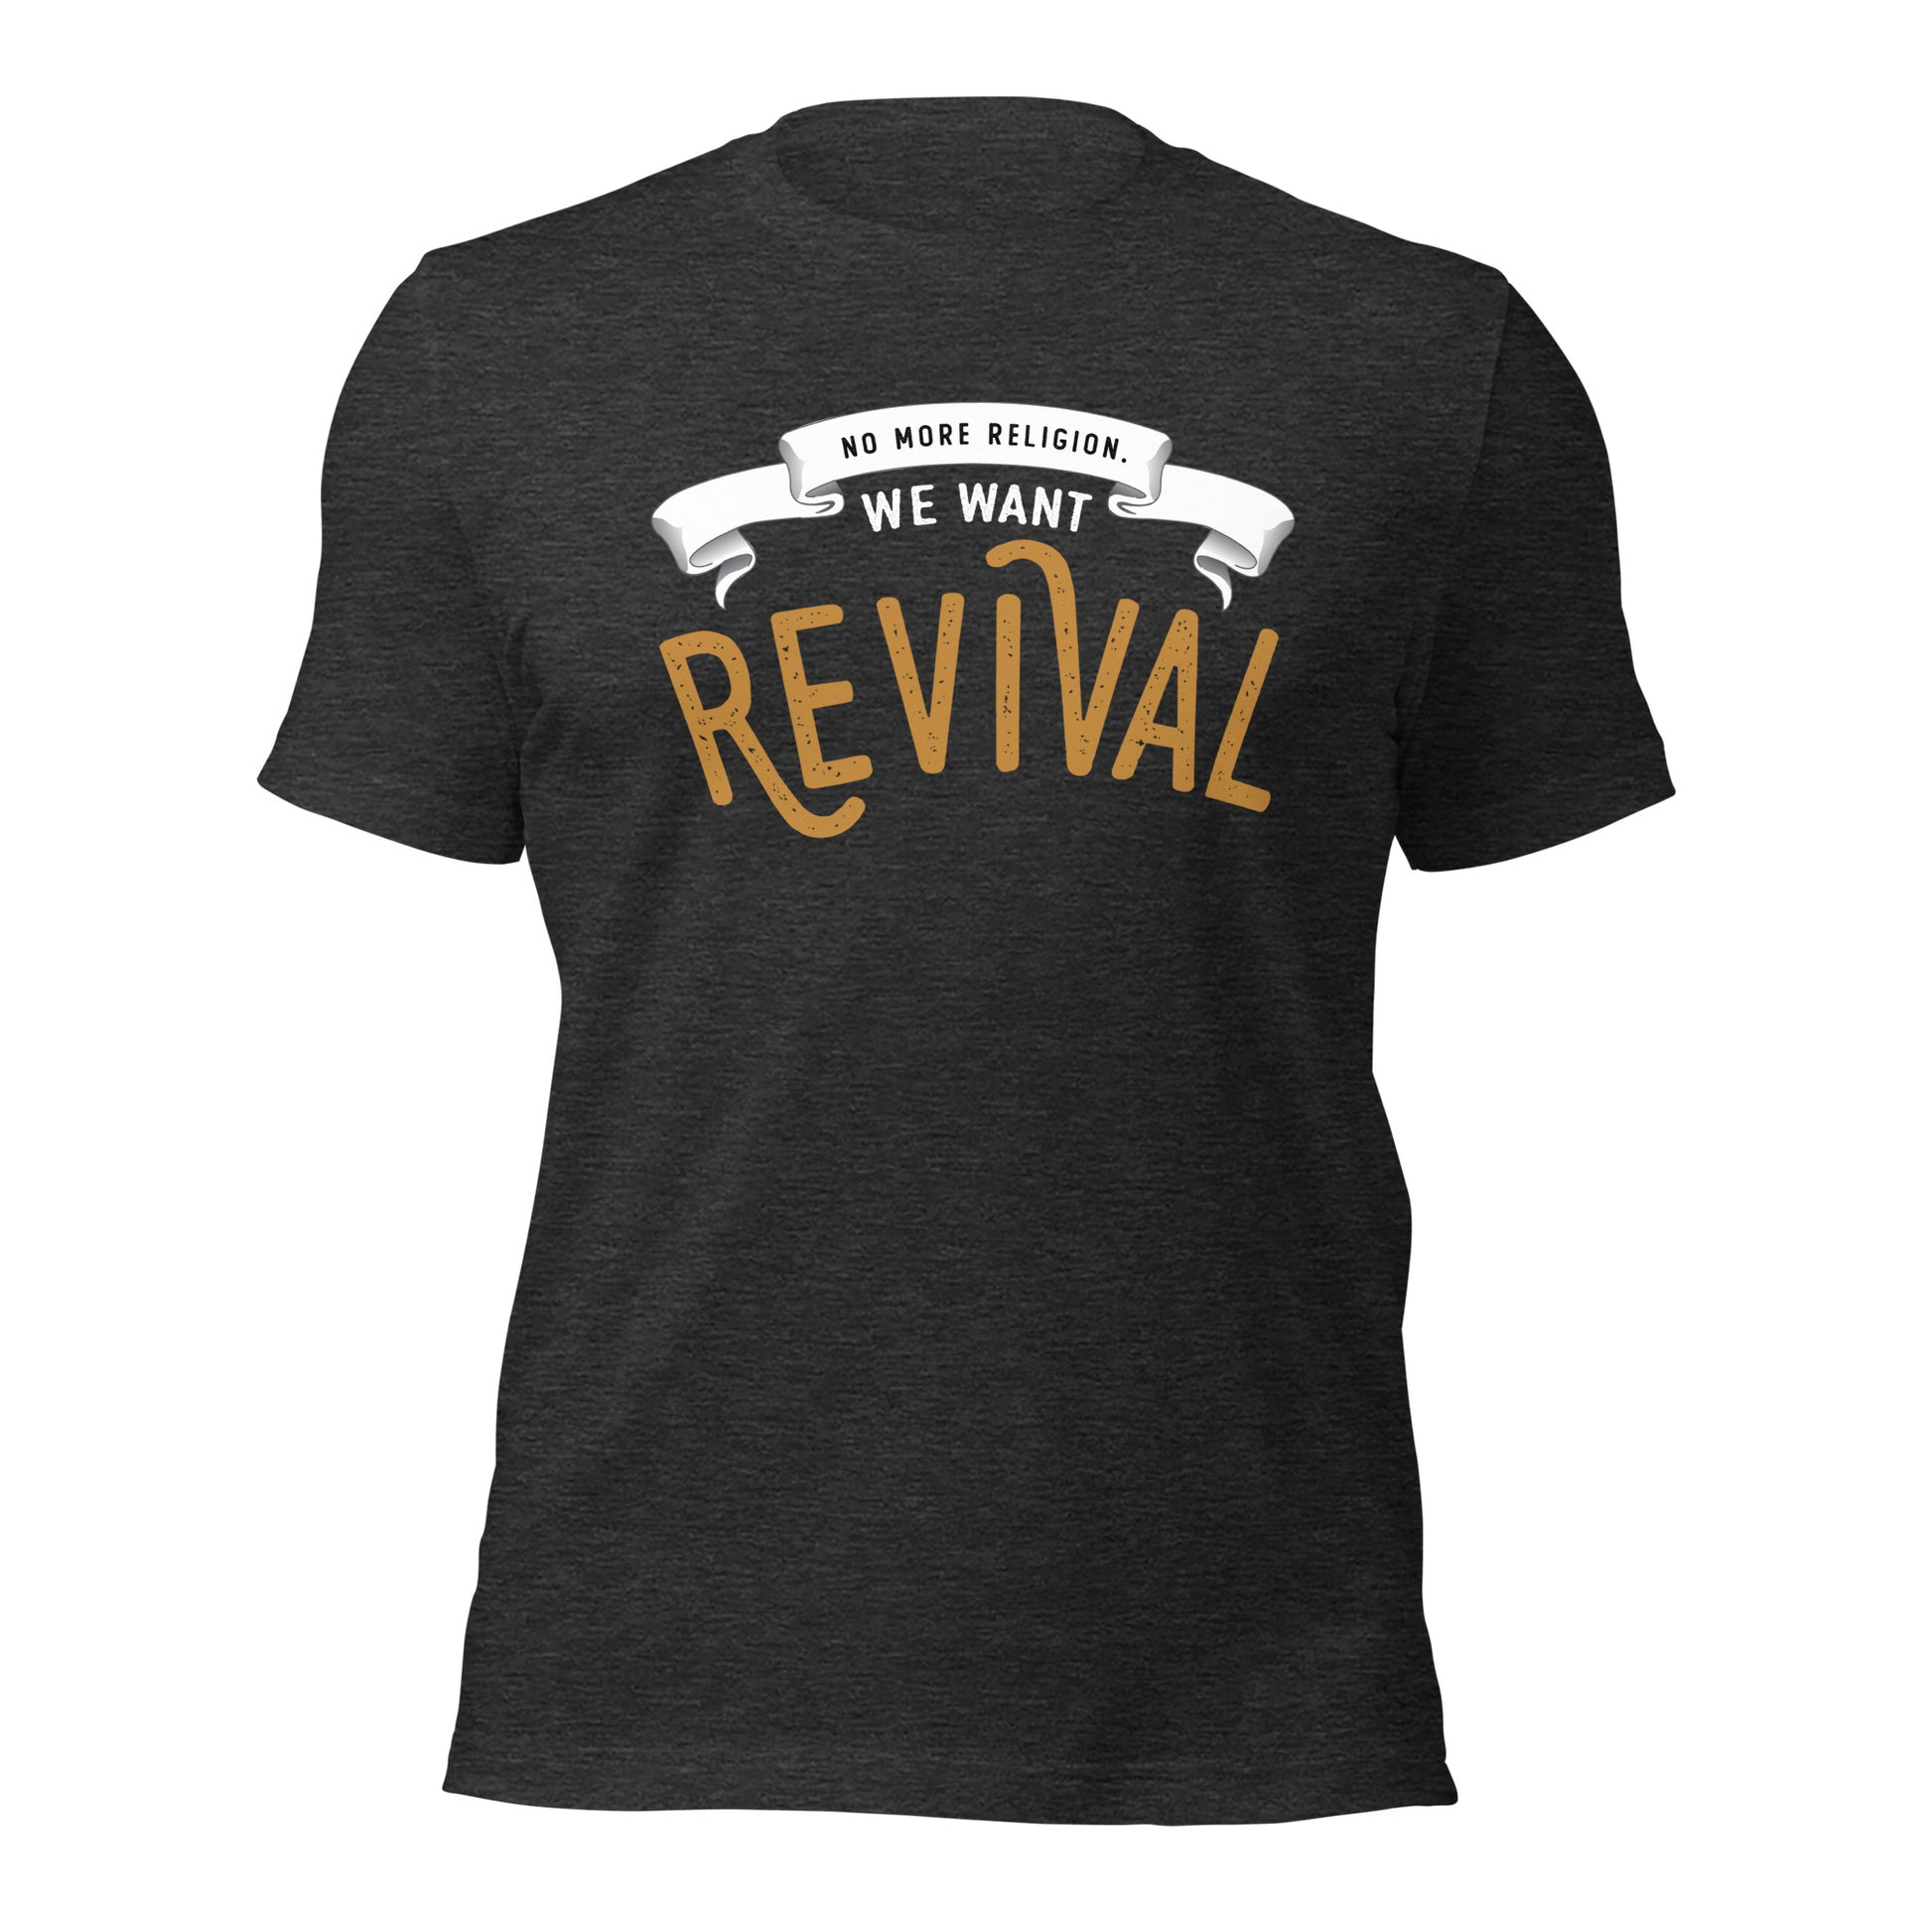 Heather Dark Gray Christian aesthetic soft Unisex T-shirt that says, No More Religion We Want Revival printed in gold and white, church gift Jesus graphic tees designed for men and women 